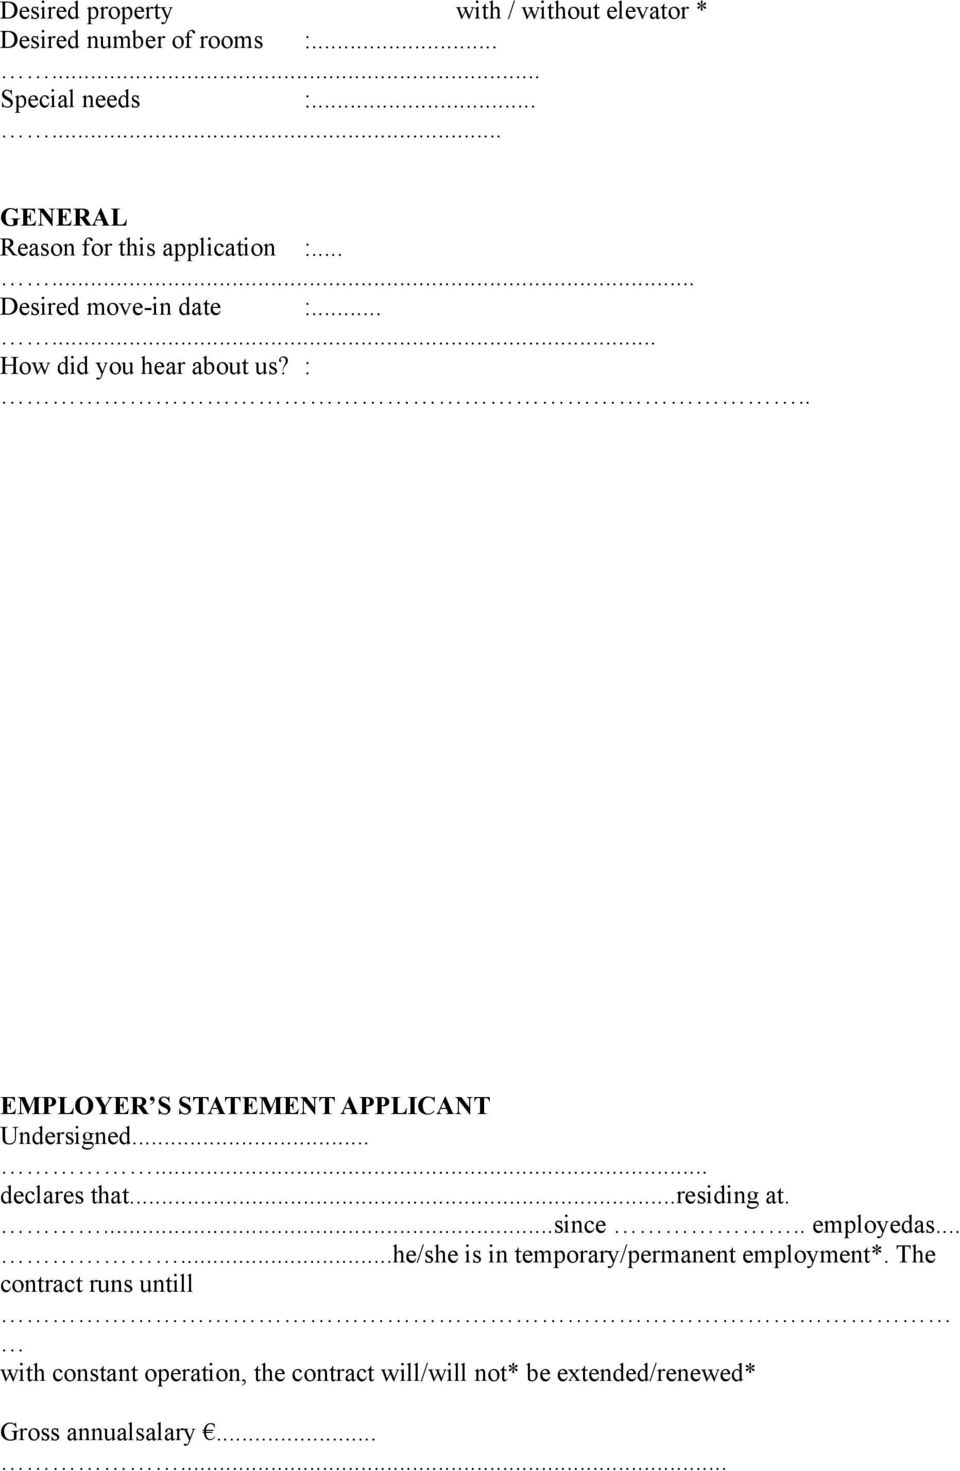 : EMPLOYER S STATEMENT APPLICANT Undersigned...... declares that...residing at....since.. employedas.